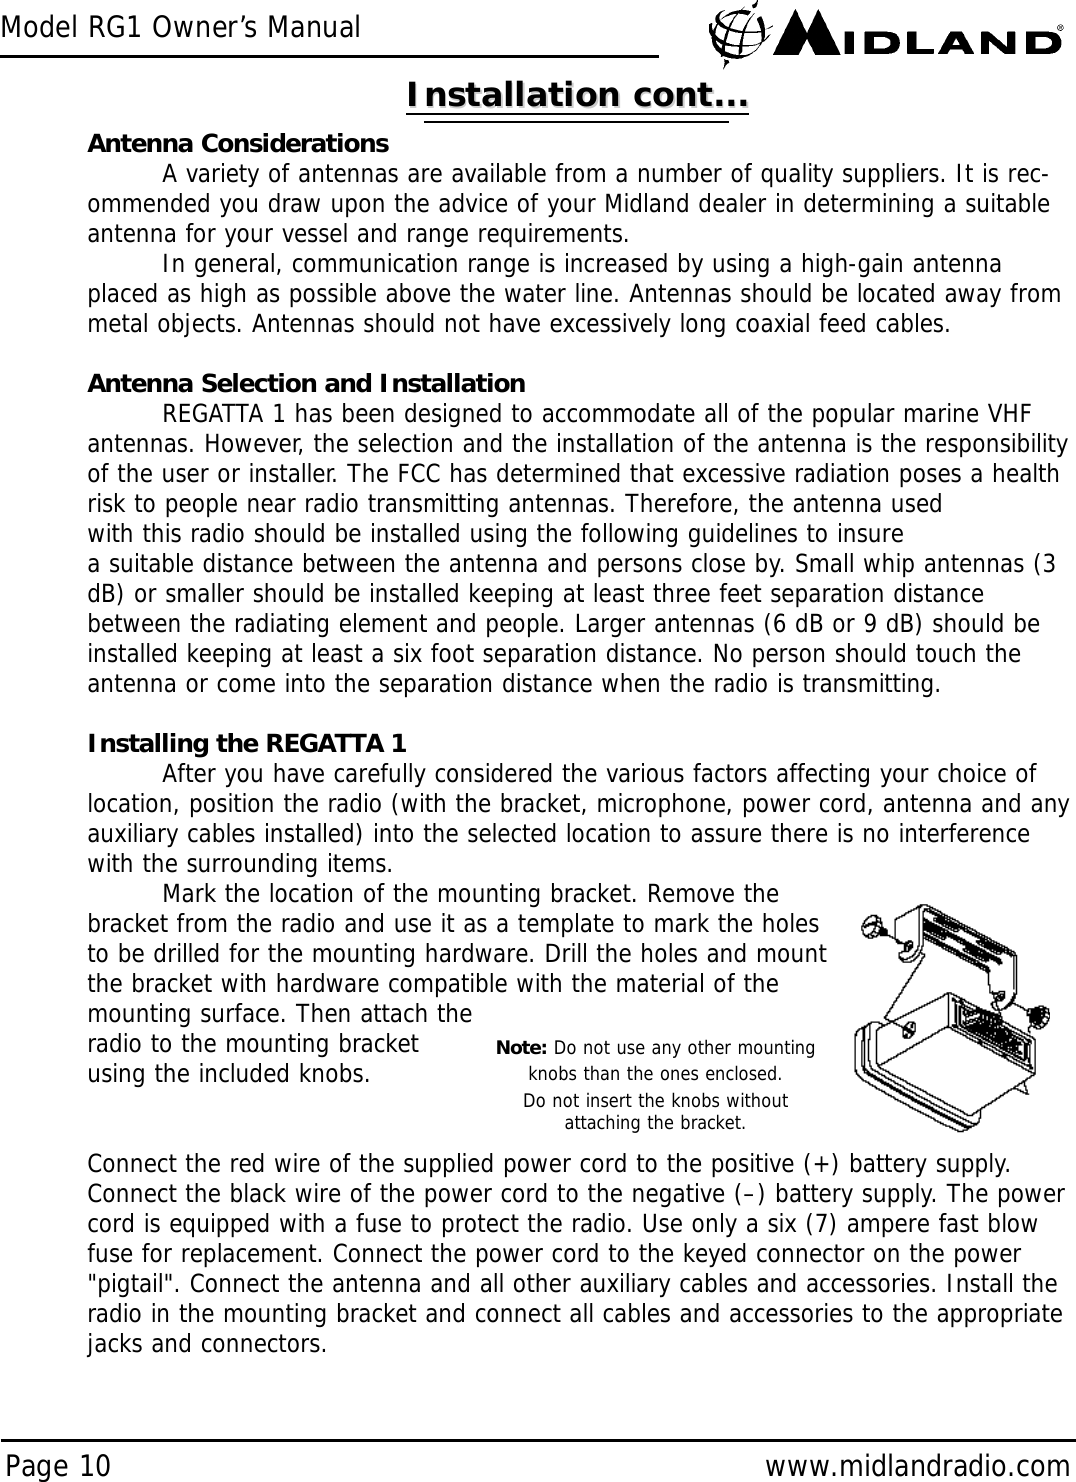 Model RG1 Owner’s ManualPage 10 www.midlandradio.comAntenna ConsiderationsA variety of antennas are available from a number of quality suppliers. It is rec-ommended you draw upon the advice of your Midland dealer in determining a suitableantenna for your vessel and range requirements.In general, communication range is increased by using a high-gain antennaplaced as high as possible above the water line. Antennas should be located away frommetal objects. Antennas should not have excessively long coaxial feed cables.Antenna Selection and InstallationREGATTA 1 has been designed to accommodate all of the popular marine VHFantennas. However, the selection and the installation of the antenna is the responsibilityof the user or installer. The FCC has determined that excessive radiation poses a healthrisk to people near radio transmitting antennas. Therefore, the antenna usedwith this radio should be installed using the following guidelines to insurea suitable distance between the antenna and persons close by. Small whip antennas (3dB) or smaller should be installed keeping at least three feet separation distancebetween the radiating element and people. Larger antennas (6 dB or 9 dB) should beinstalled keeping at least a six foot separation distance. No person should touch theantenna or come into the separation distance when the radio is transmitting.Installing the REGATTA 1After you have carefully considered the various factors affecting your choice oflocation, position the radio (with the bracket, microphone, power cord, antenna and anyauxiliary cables installed) into the selected location to assure there is no interferencewith the surrounding items.Mark the location of the mounting bracket. Remove thebracket from the radio and use it as a template to mark the holesto be drilled for the mounting hardware. Drill the holes and mountthe bracket with hardware compatible with the material of themounting surface. Then attach theradio to the mounting bracket using the included knobs.Connect the red wire of the supplied power cord to the positive (+) battery supply.Connect the black wire of the power cord to the negative (–) battery supply. The powercord is equipped with a fuse to protect the radio. Use only a six (7) ampere fast blowfuse for replacement. Connect the power cord to the keyed connector on the power&quot;pigtail&quot;. Connect the antenna and all other auxiliary cables and accessories. Install theradio in the mounting bracket and connect all cables and accessories to the appropriatejacks and connectors.Installation cont...Installation cont...Note: Do not use any other mountingknobs than the ones enclosed.Do not insert the knobs withoutattaching the bracket.